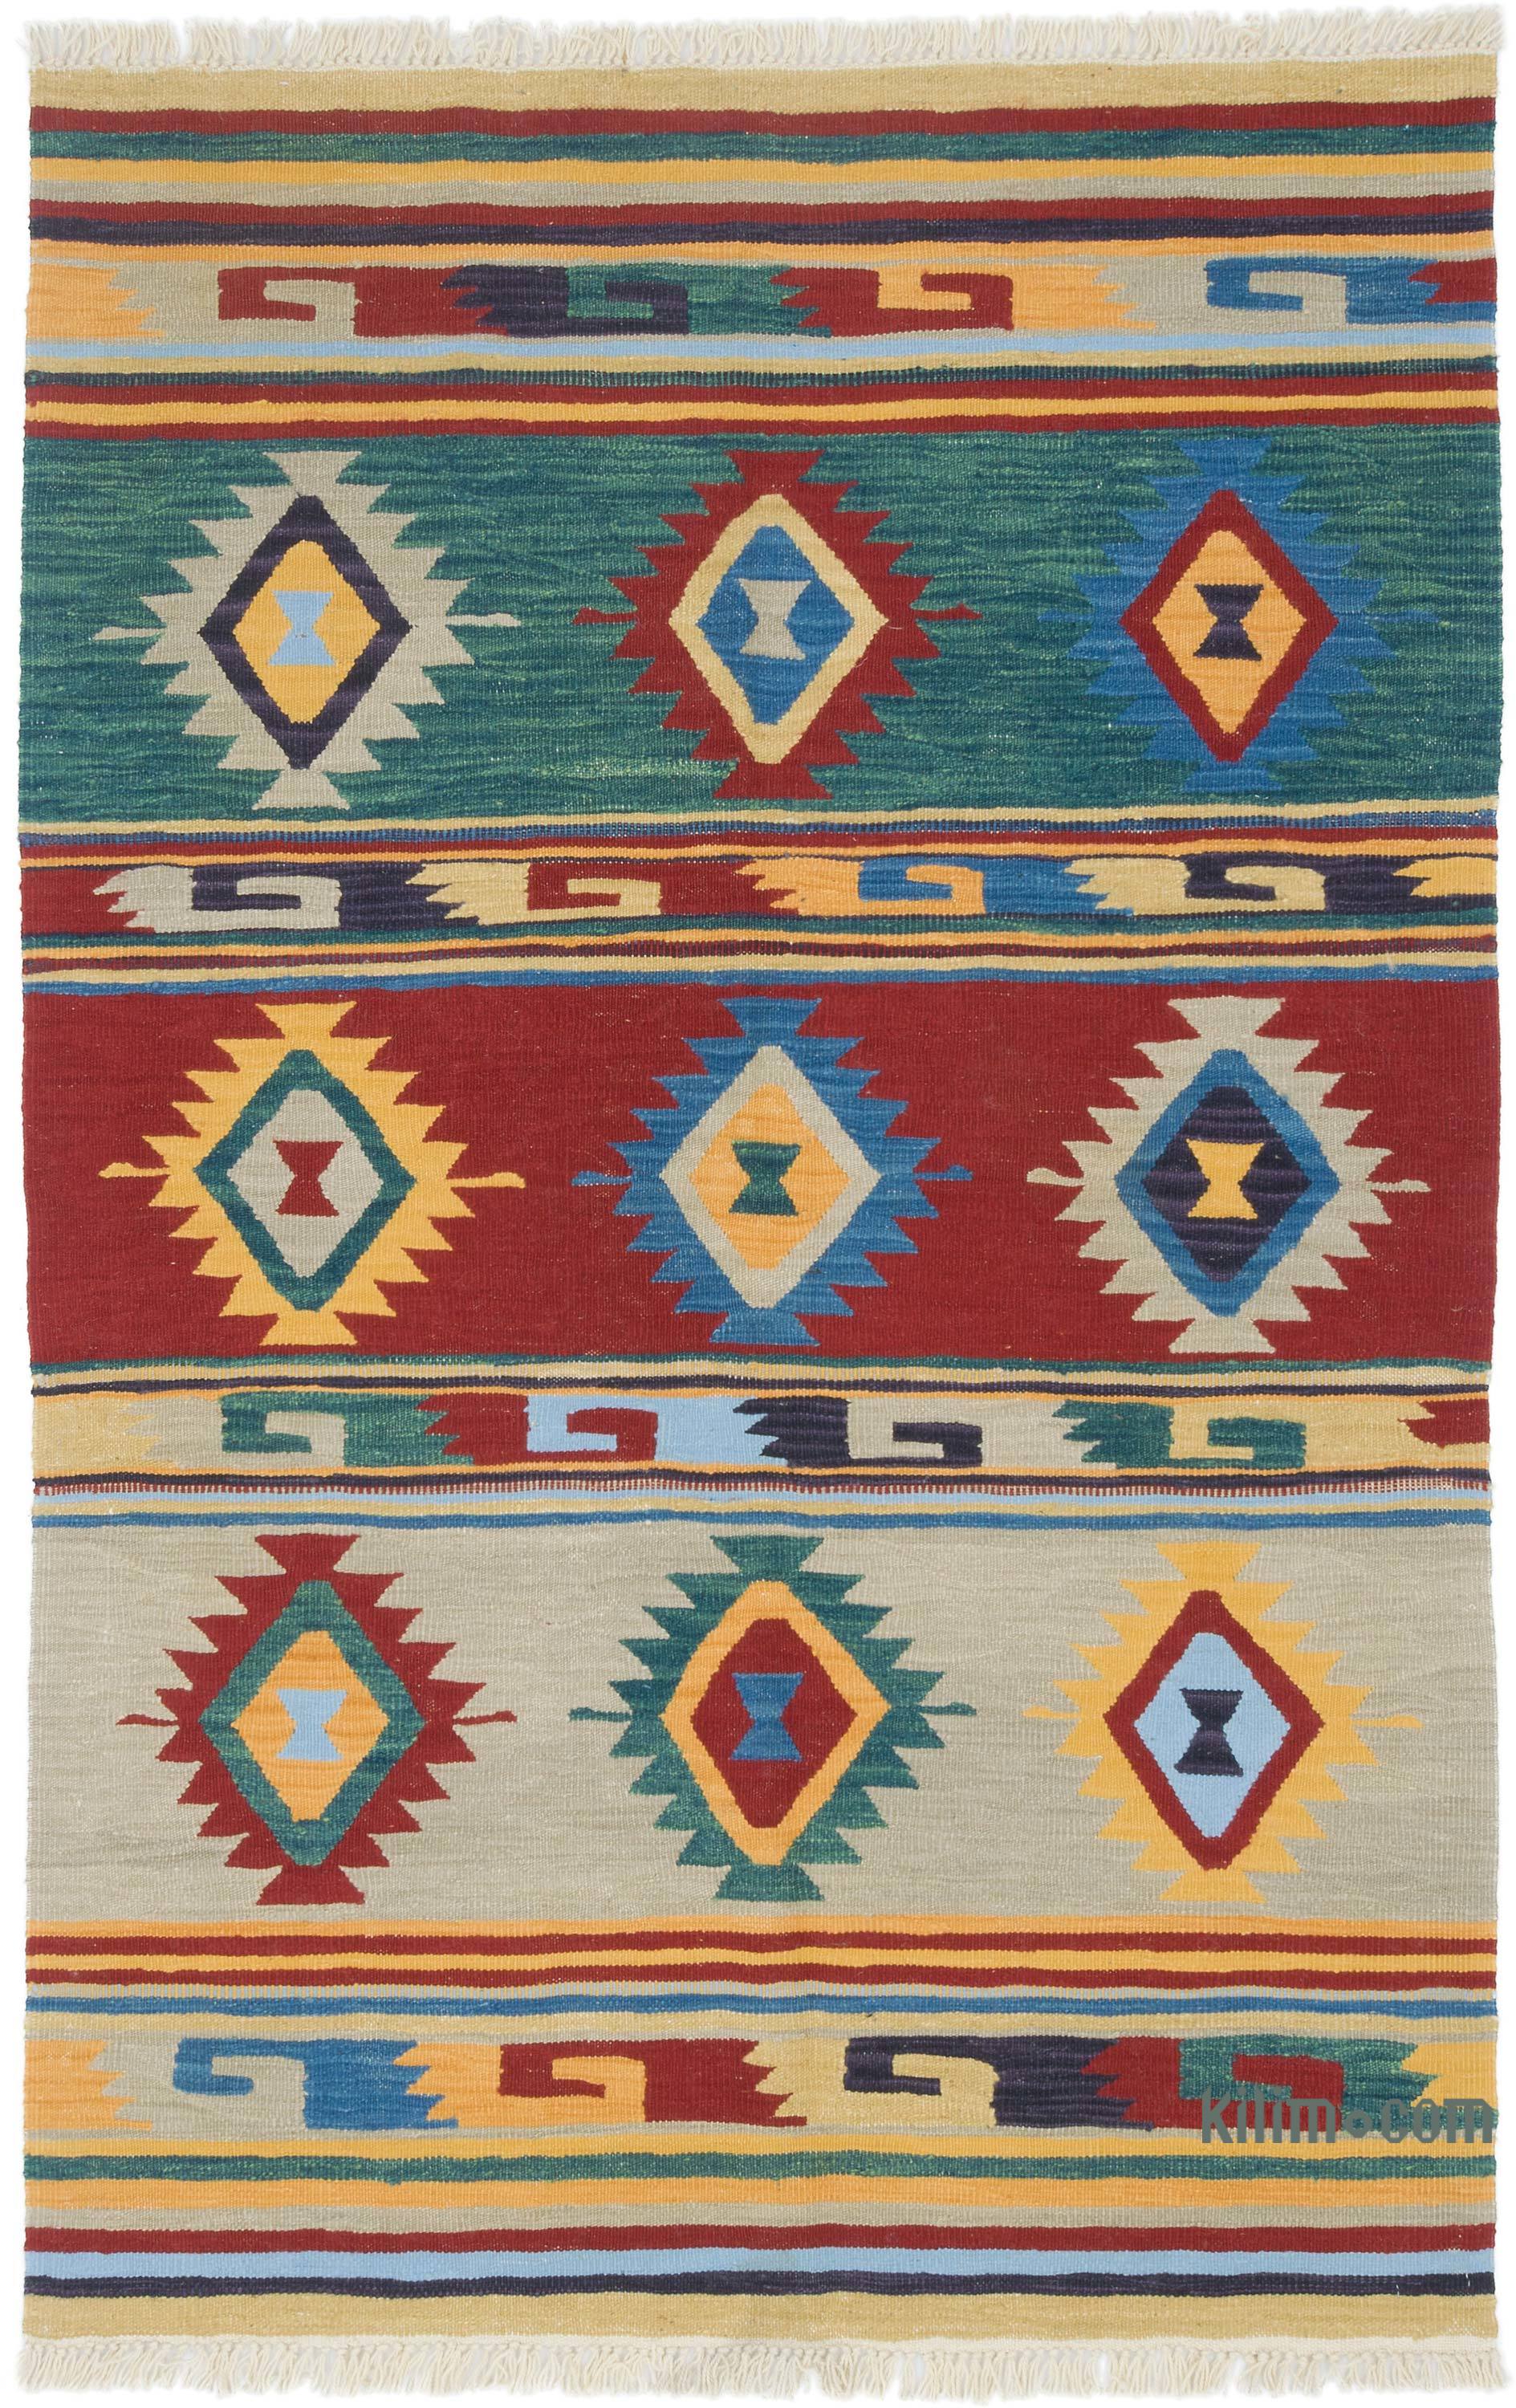 K0059550 New Handwoven Turkish Kilim Rug - 4' x 6' 3 (48 x 75)  The  Source for Vintage Rugs, Tribal Kilim Rugs, Wool Turkish Rugs, Overdyed  Persian Rugs, Runner Rugs, Patchwork